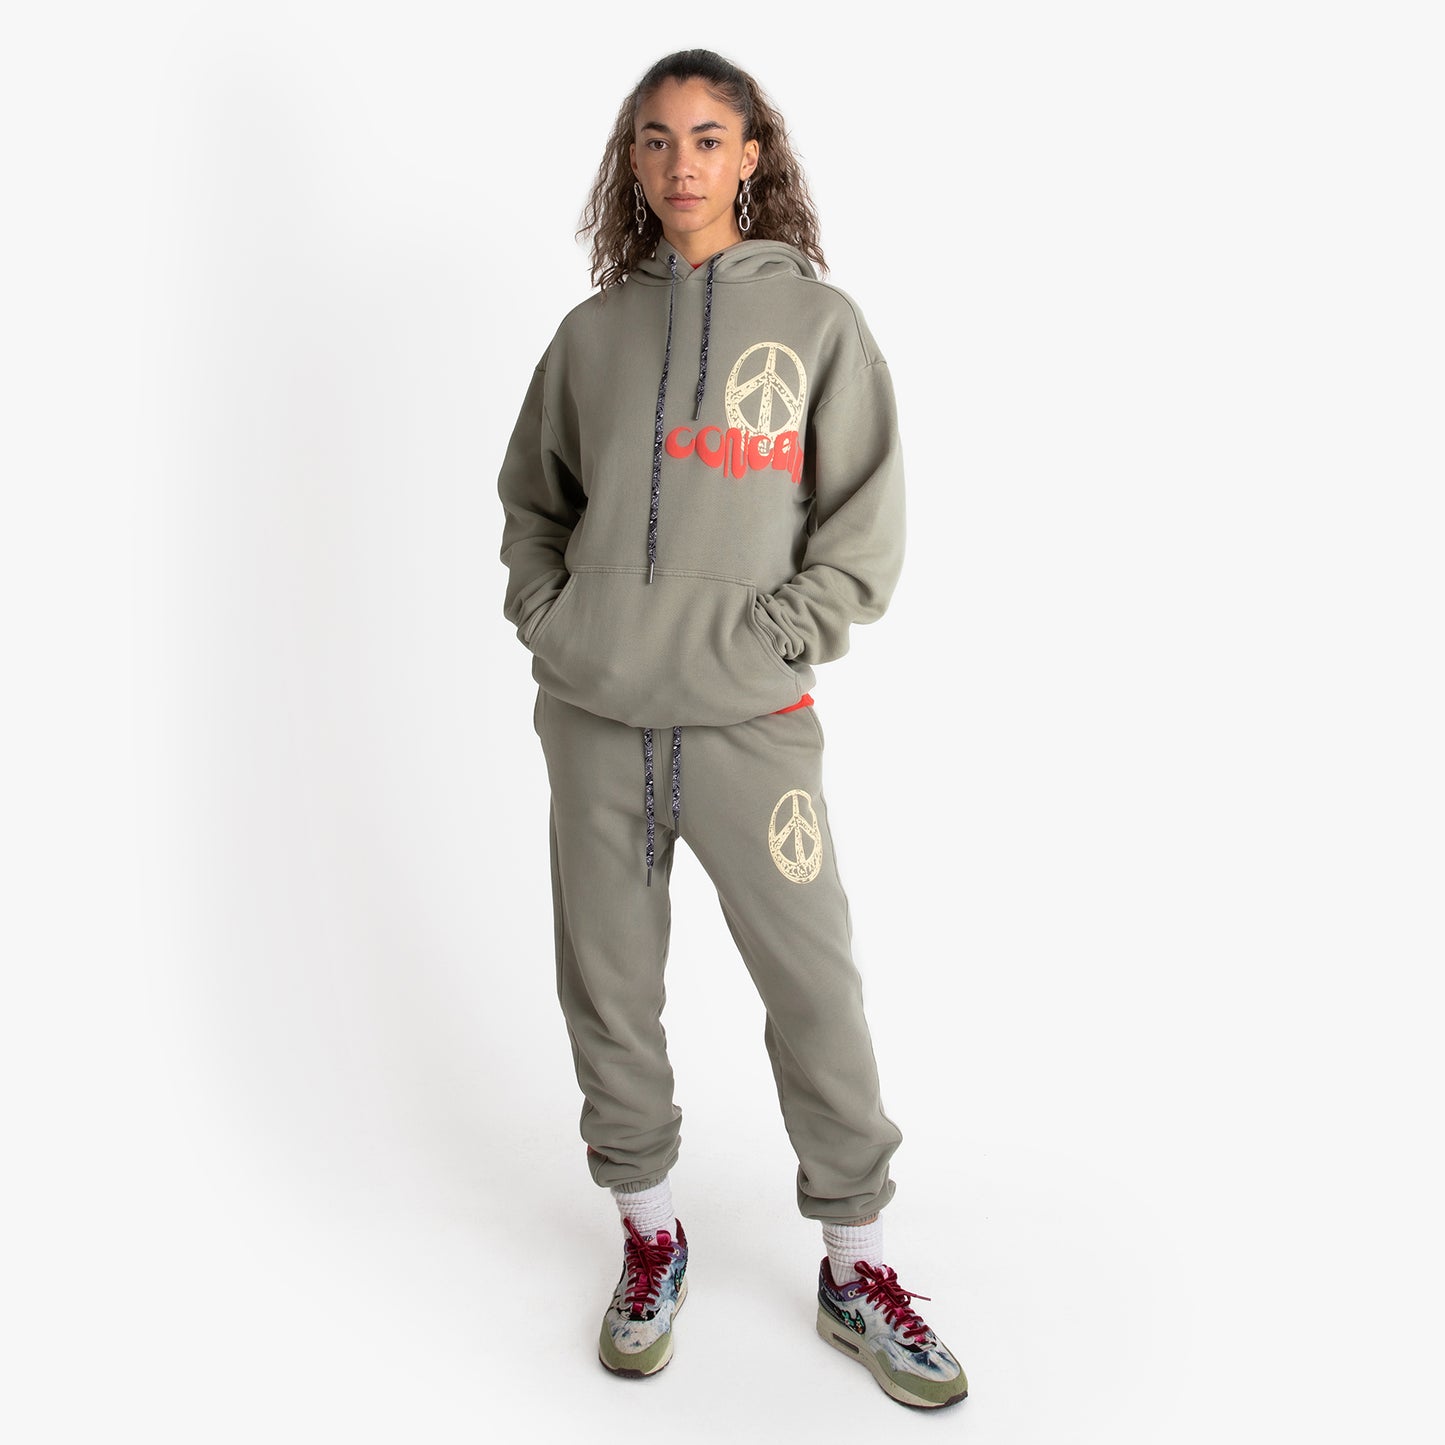 Concepts Warped Peace Hoodie (Moss Green)